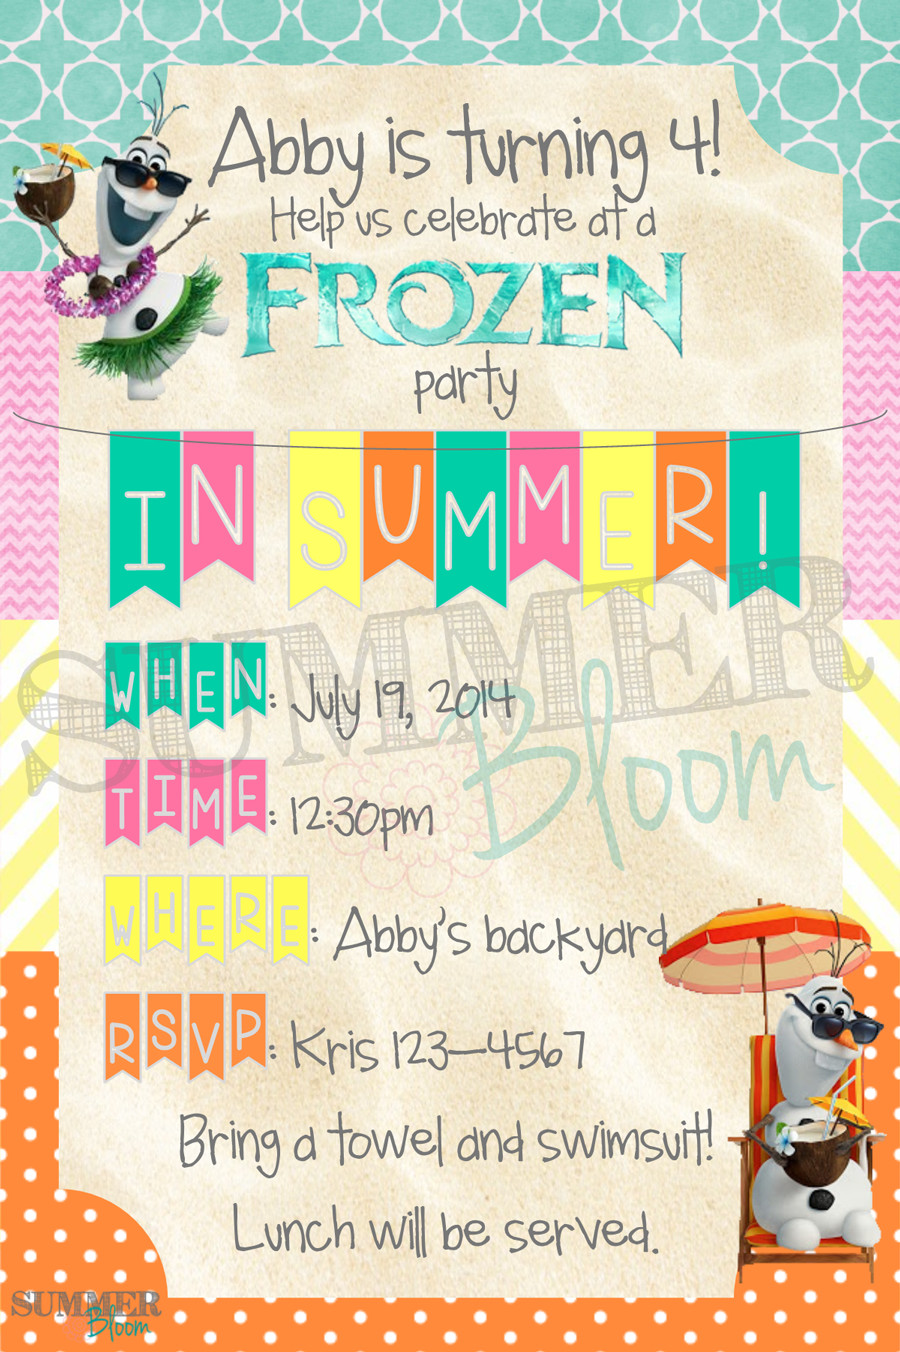 Summer Party Invitations Ideas
 Frozen and Olaf "In Summer" themed Birthday Party